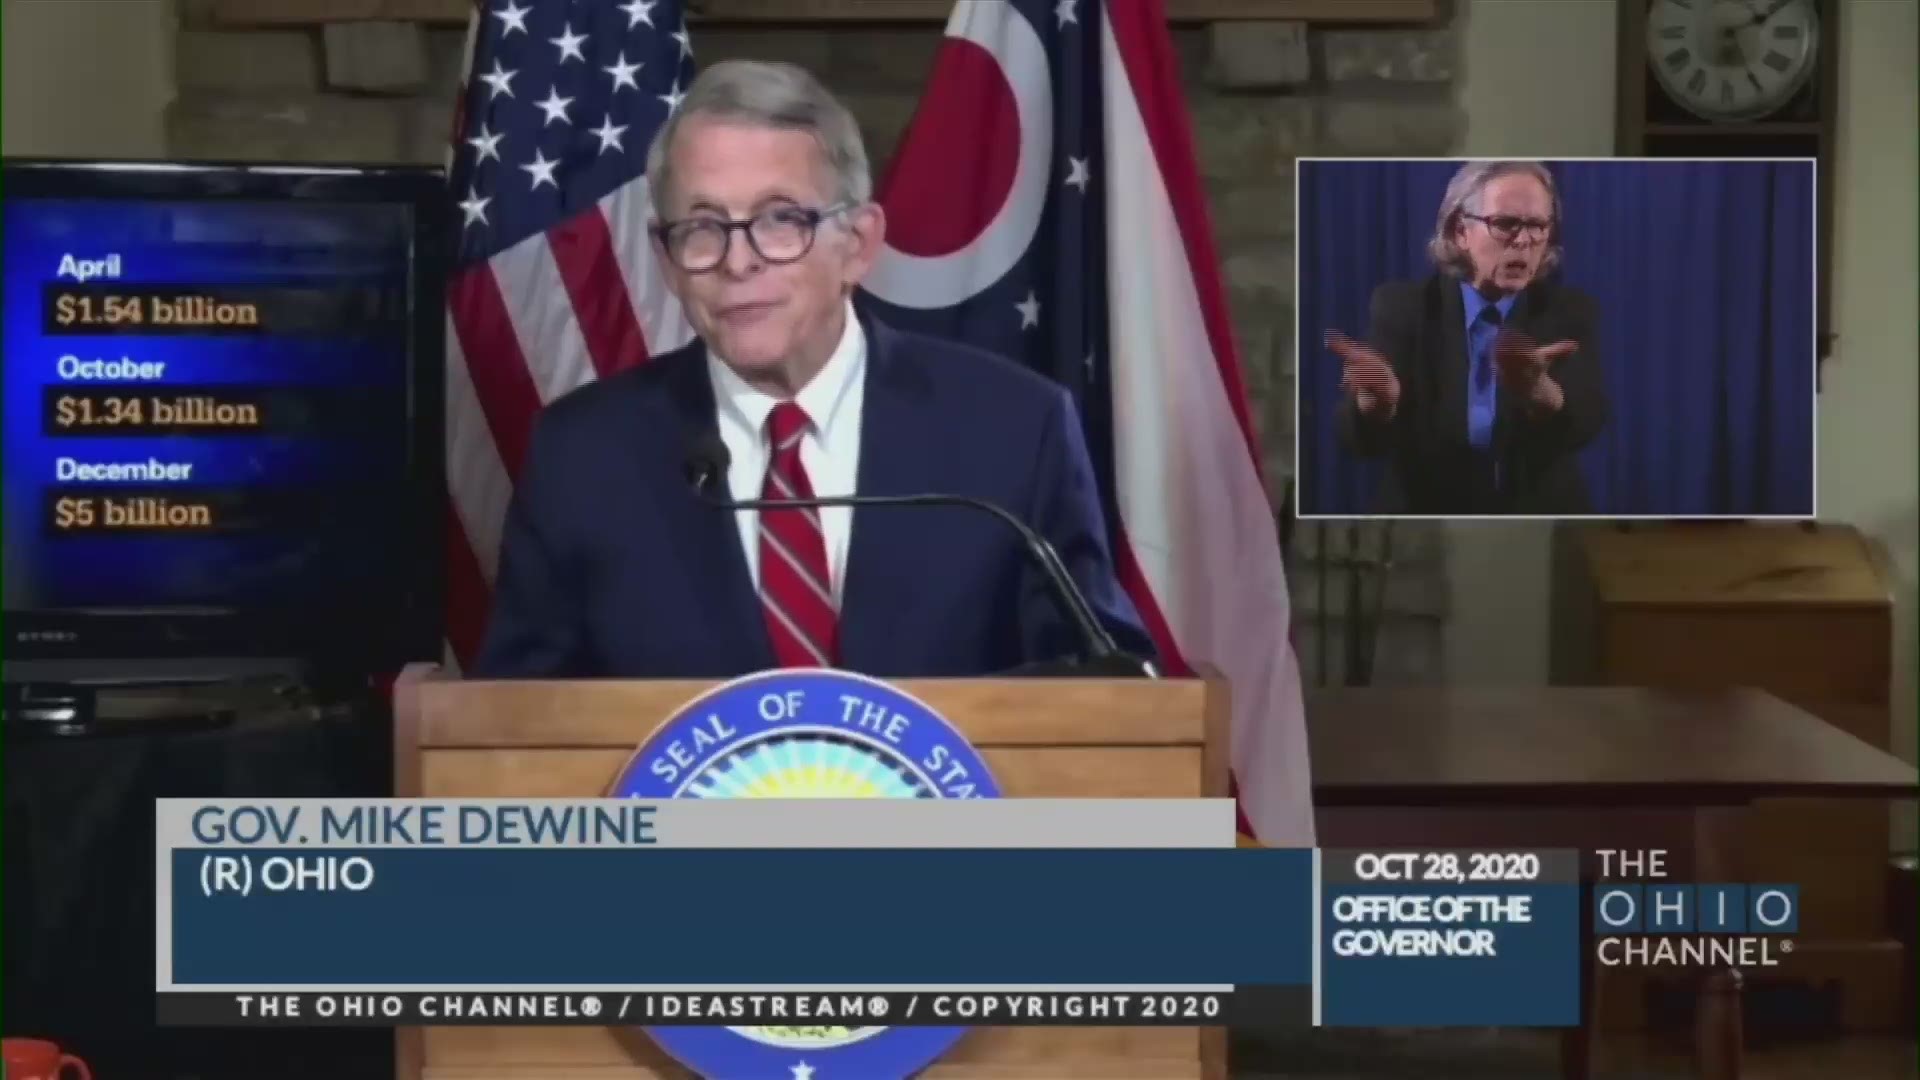 Ohio Governor Mike DeWine said he will not issue orders for any county that reaches Level 4 'purple' of the state's coronavirus risk advisory.